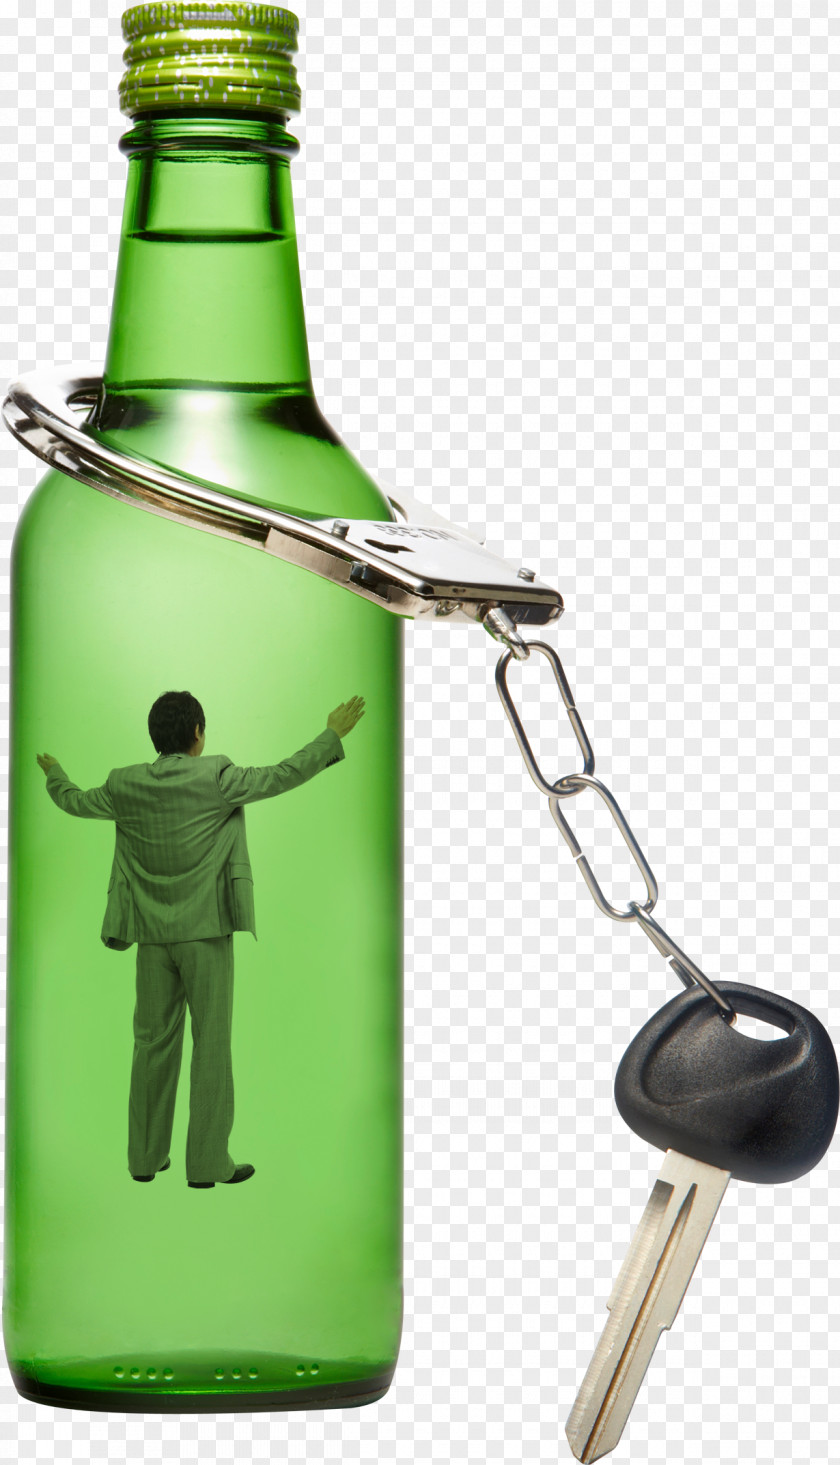 Bottle Driving Under The Influence Alcoholic Drink Glass PNG